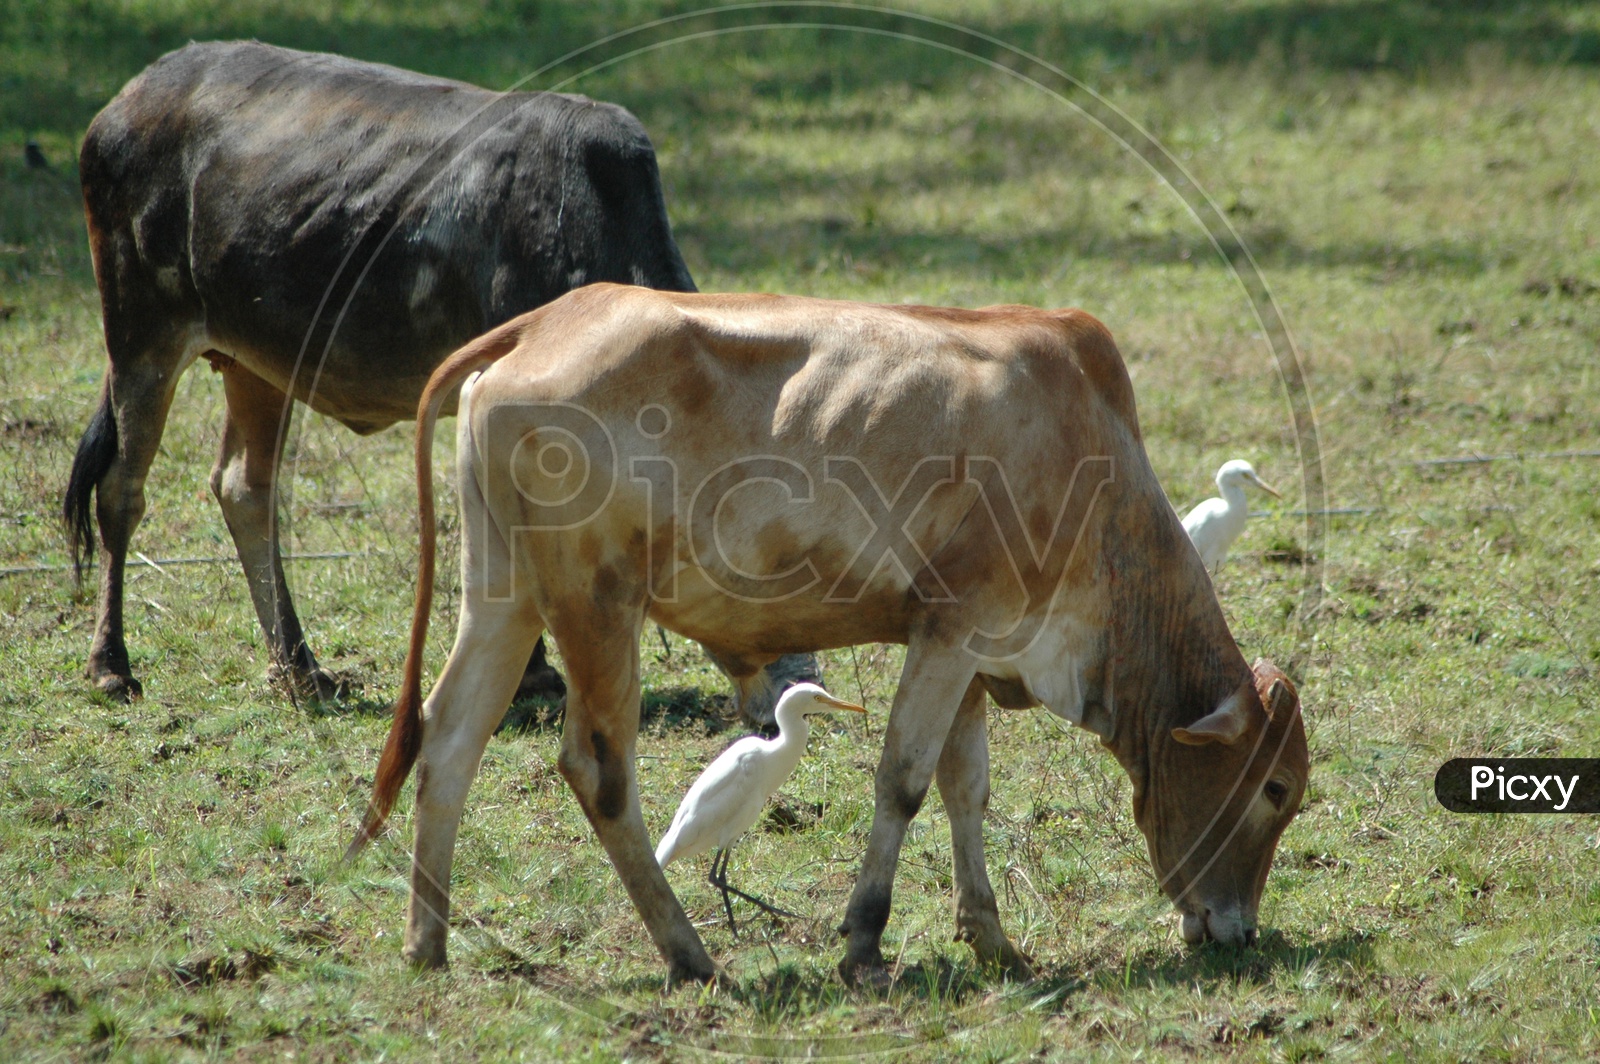 Cattle egrets foraging in the grass near an oxen